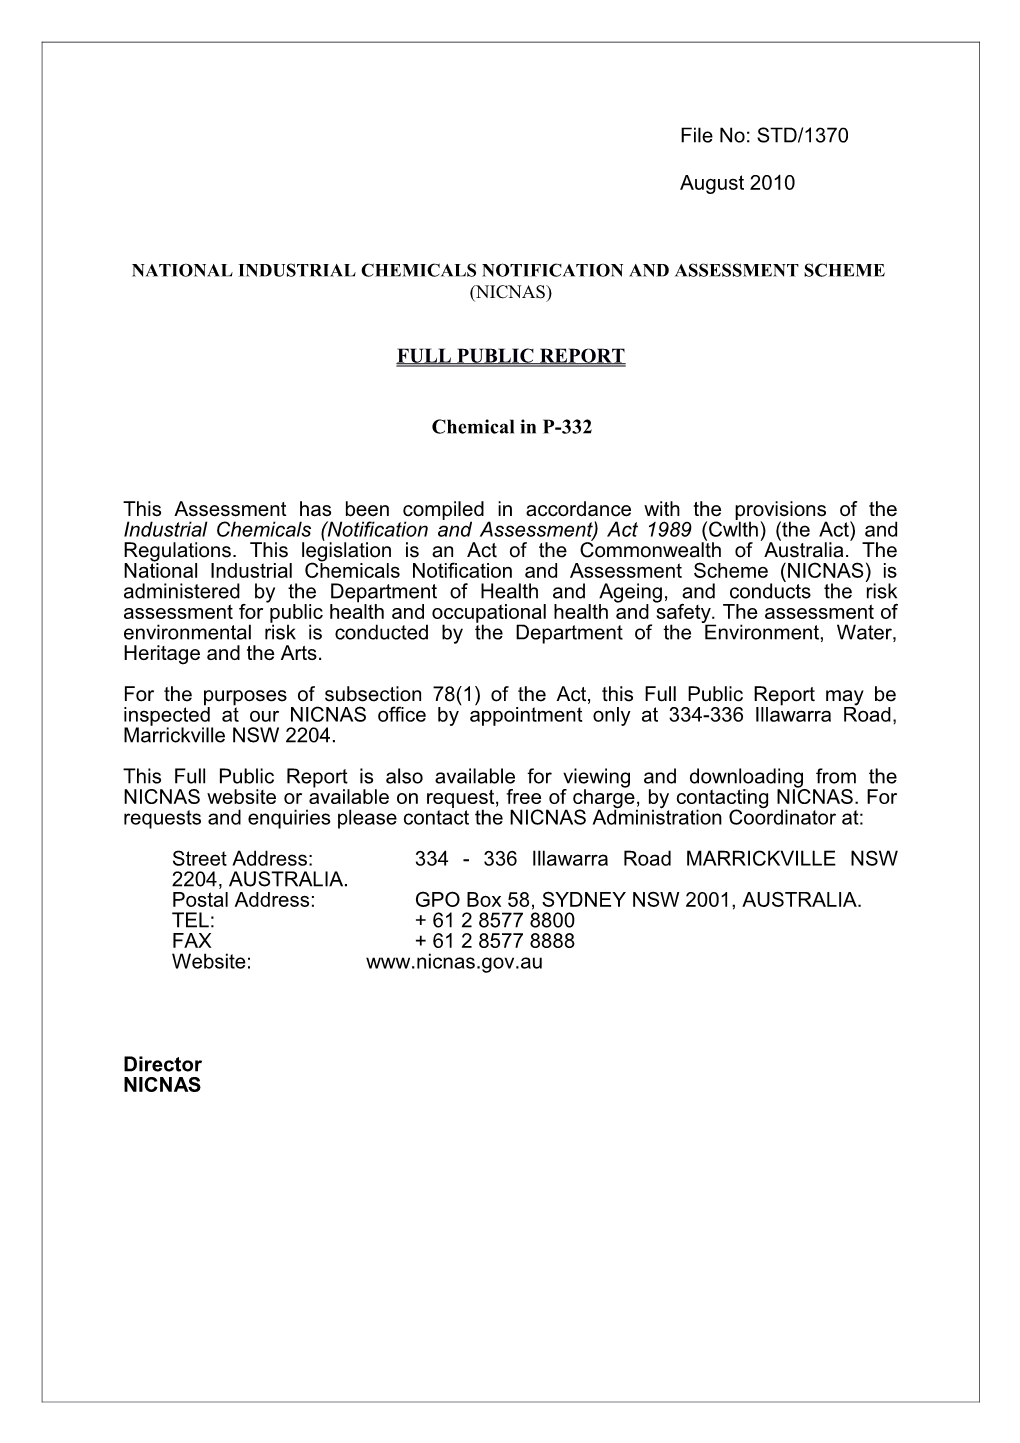 National Industrial Chemicals Notification and Assessment Scheme s23